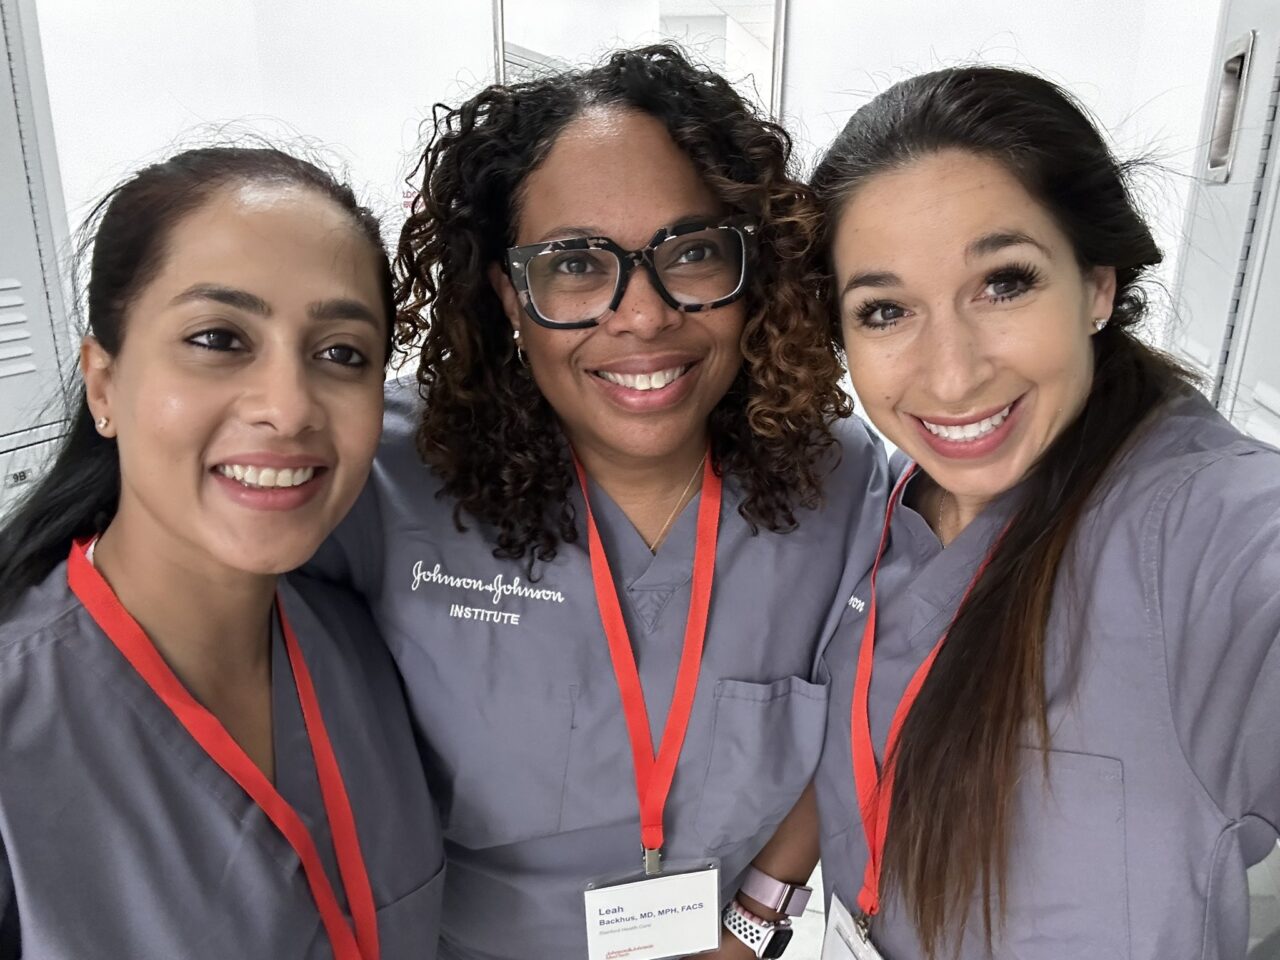 Women leaders in surgery event – Women In Thoracic Surgery